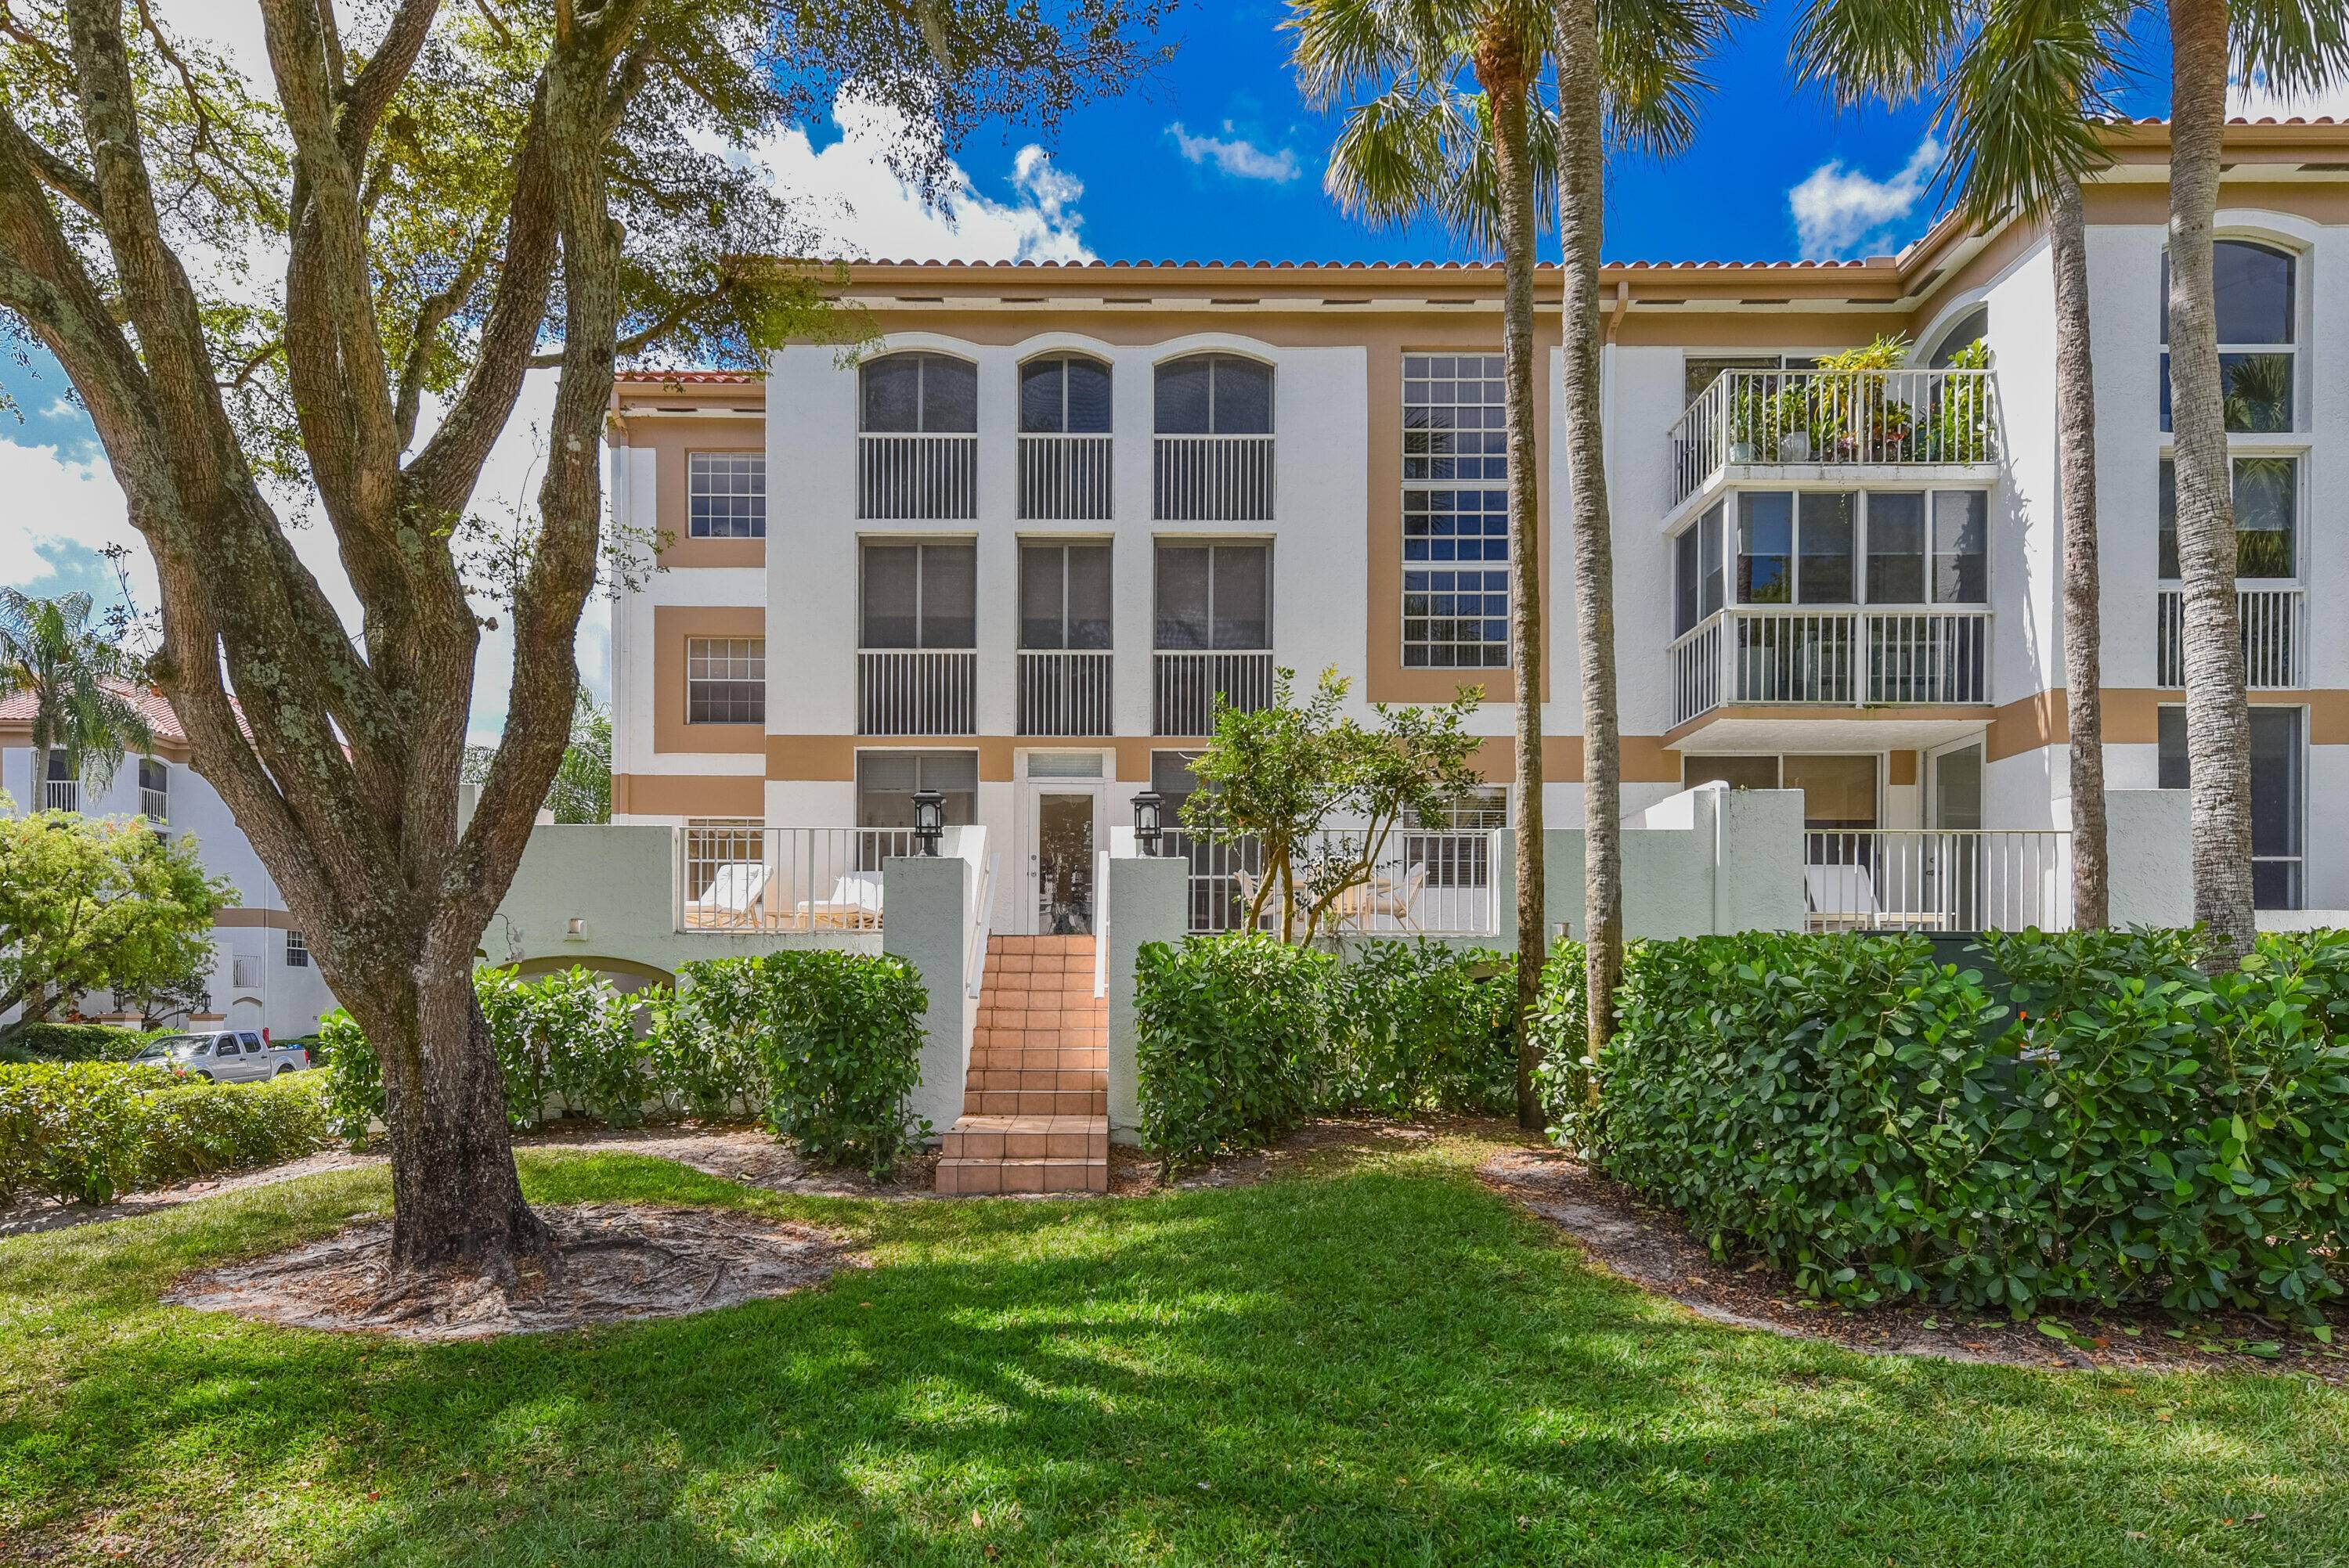 Step into opulent, luxury living at this vibrant three bedroom, two and a half bathroom condo, nestled w in the highly regarded embrace of Boca Grove's exclusive country club.